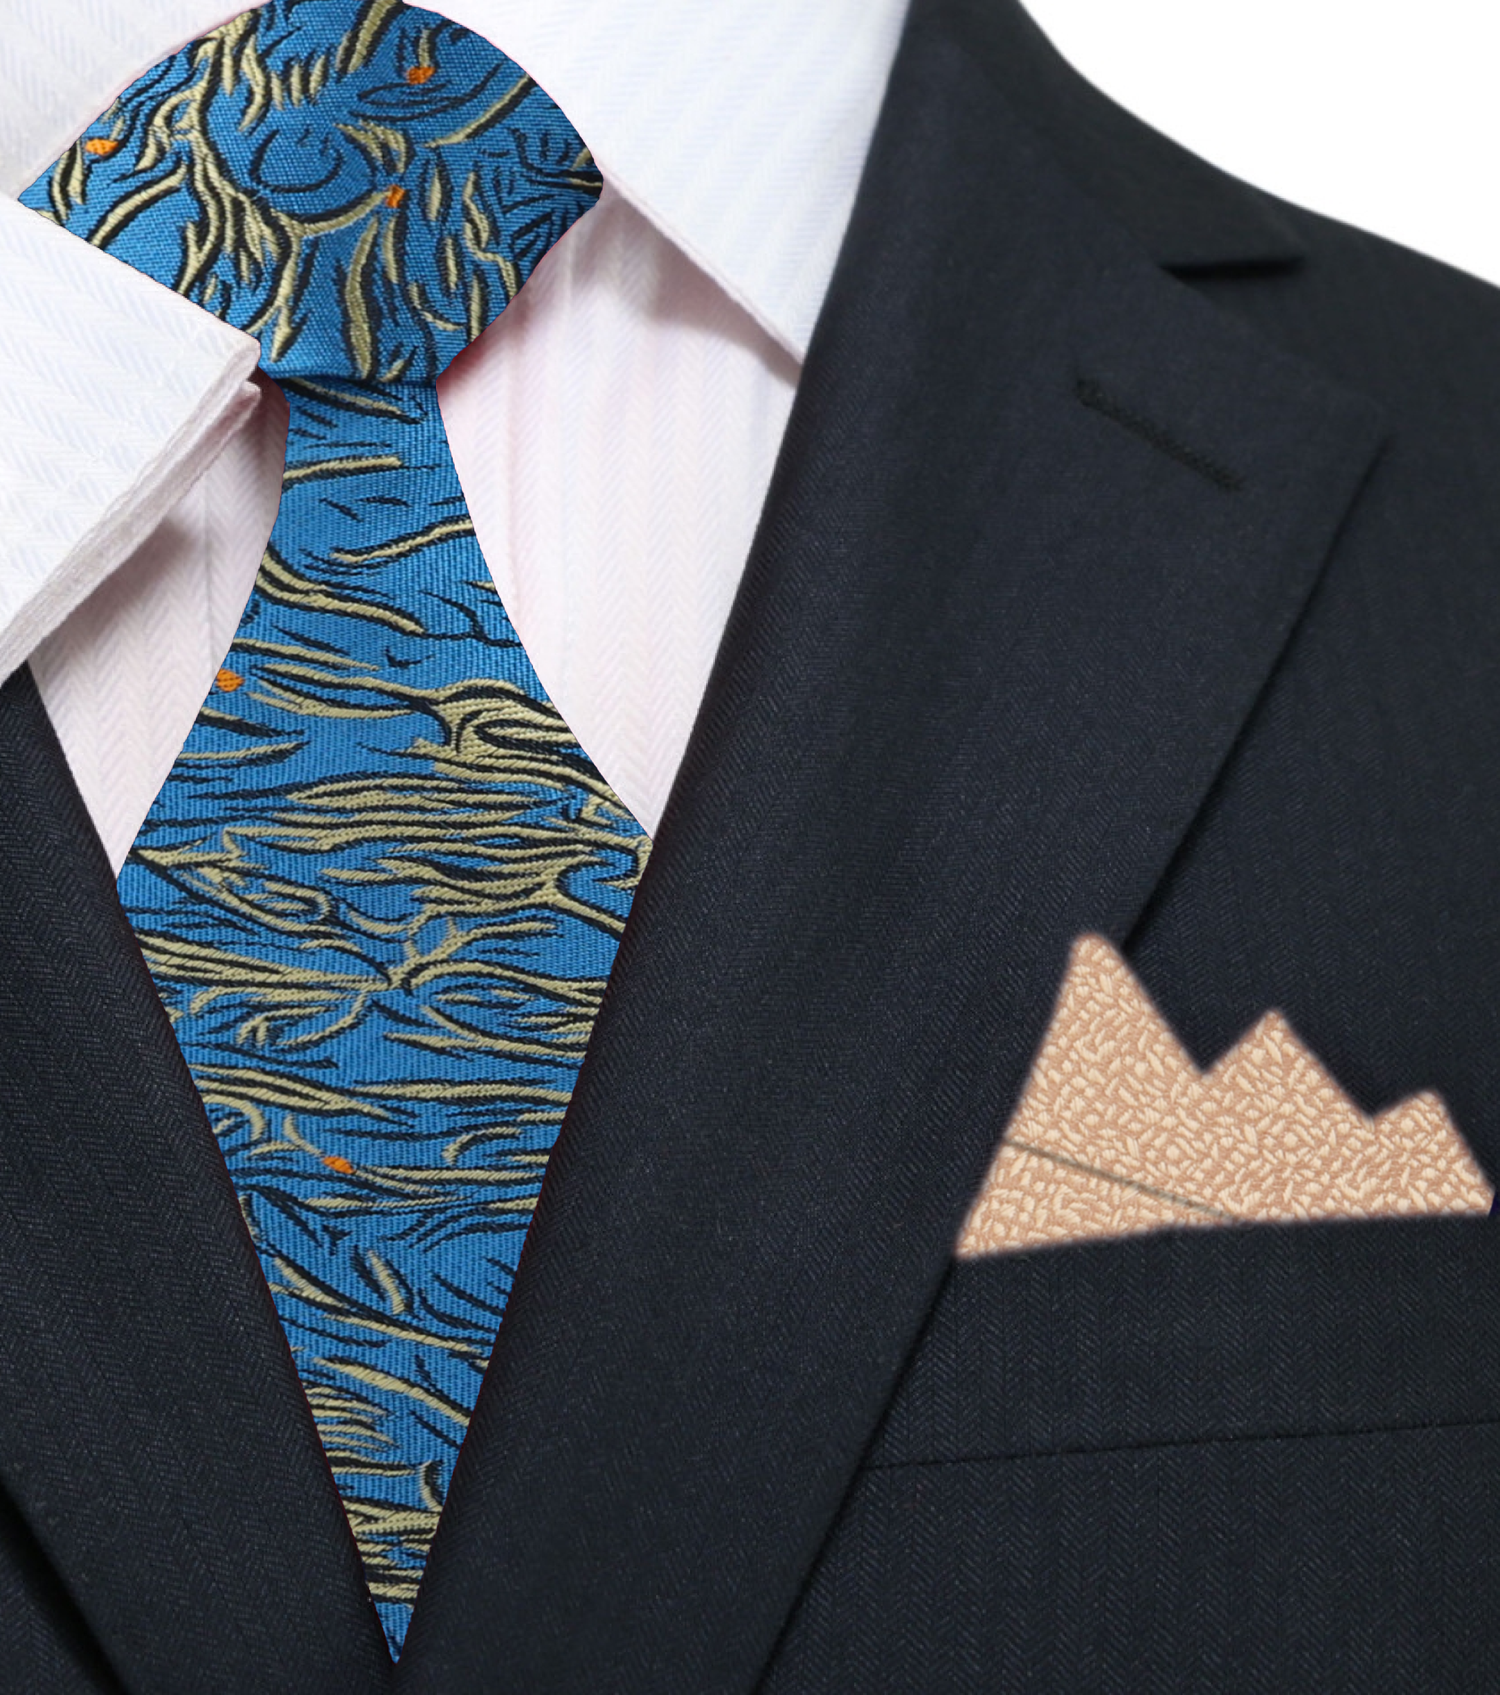 Main: Teal, Pale Gold and Orange Abstract Necktie with Light Gold Square